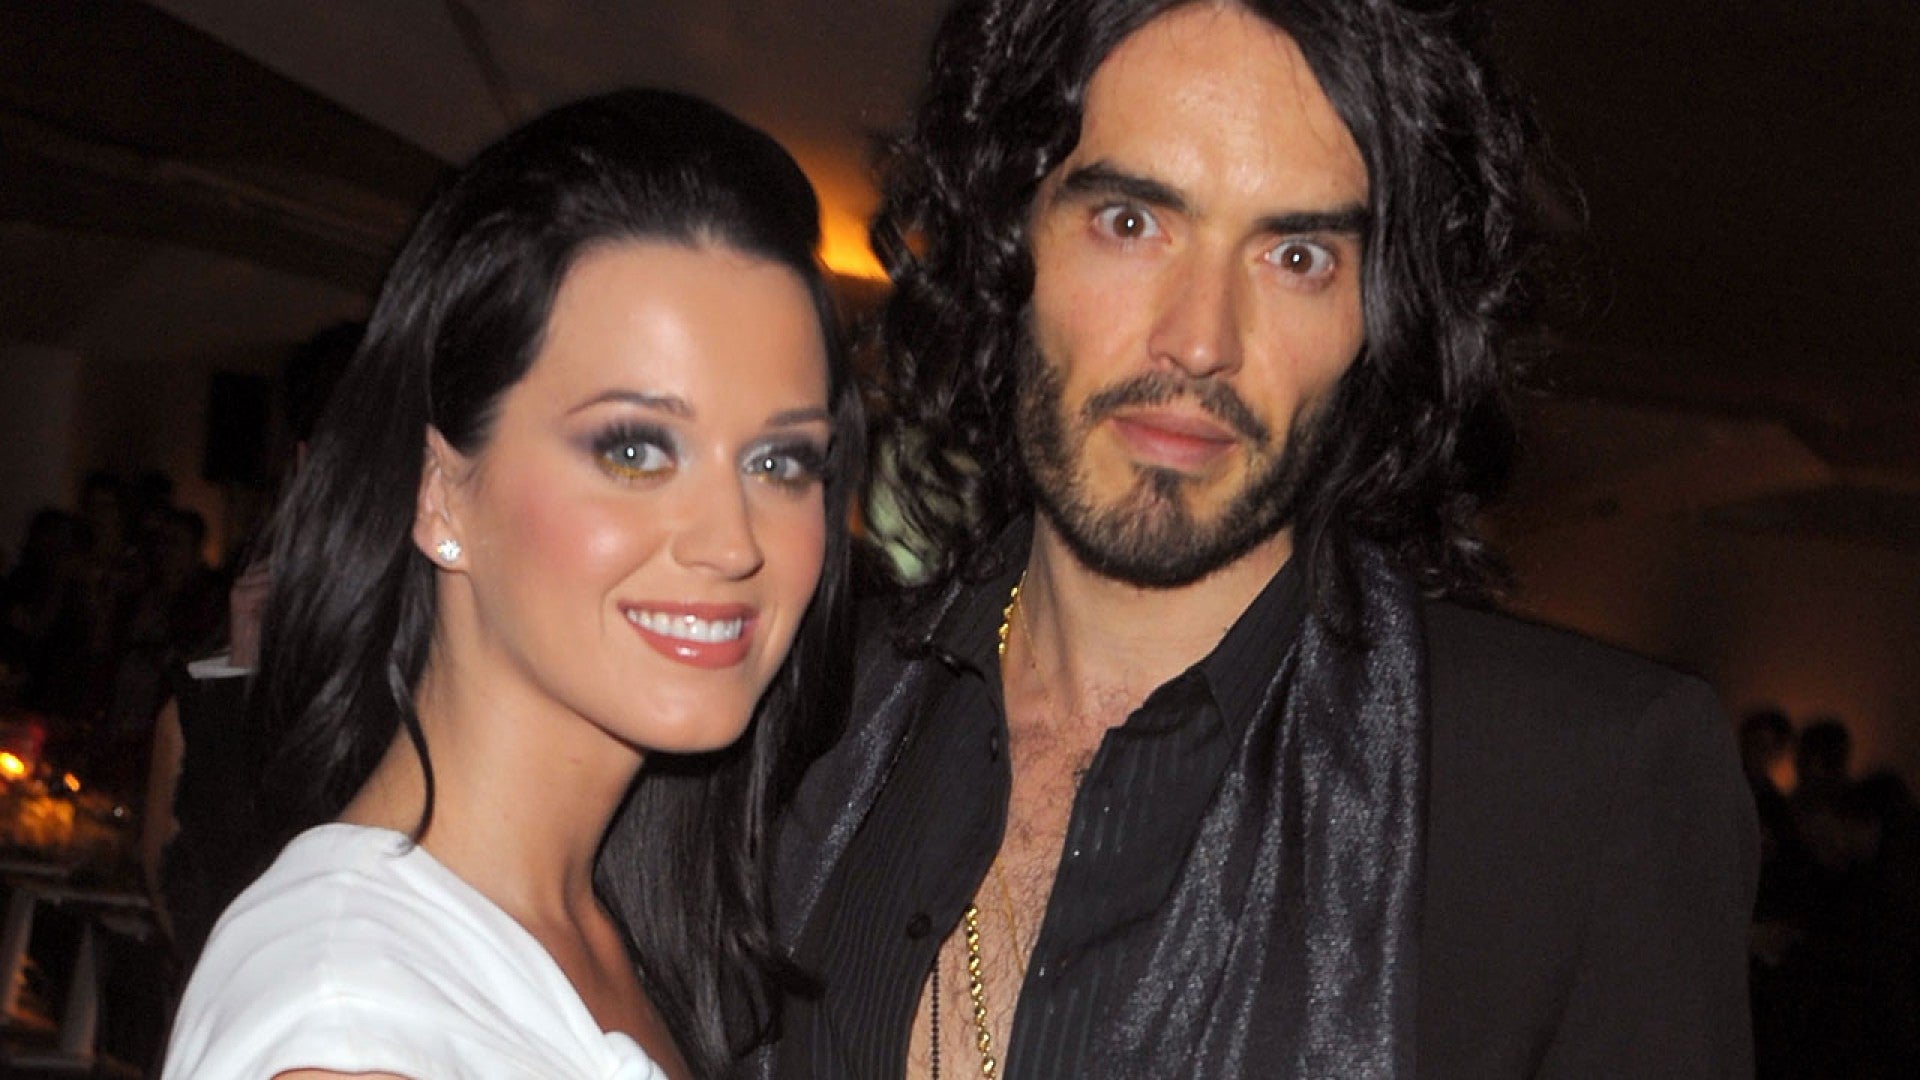 Russell Brand Slams 'Vapid' Ex-Wife Katy Perry in New Documentary